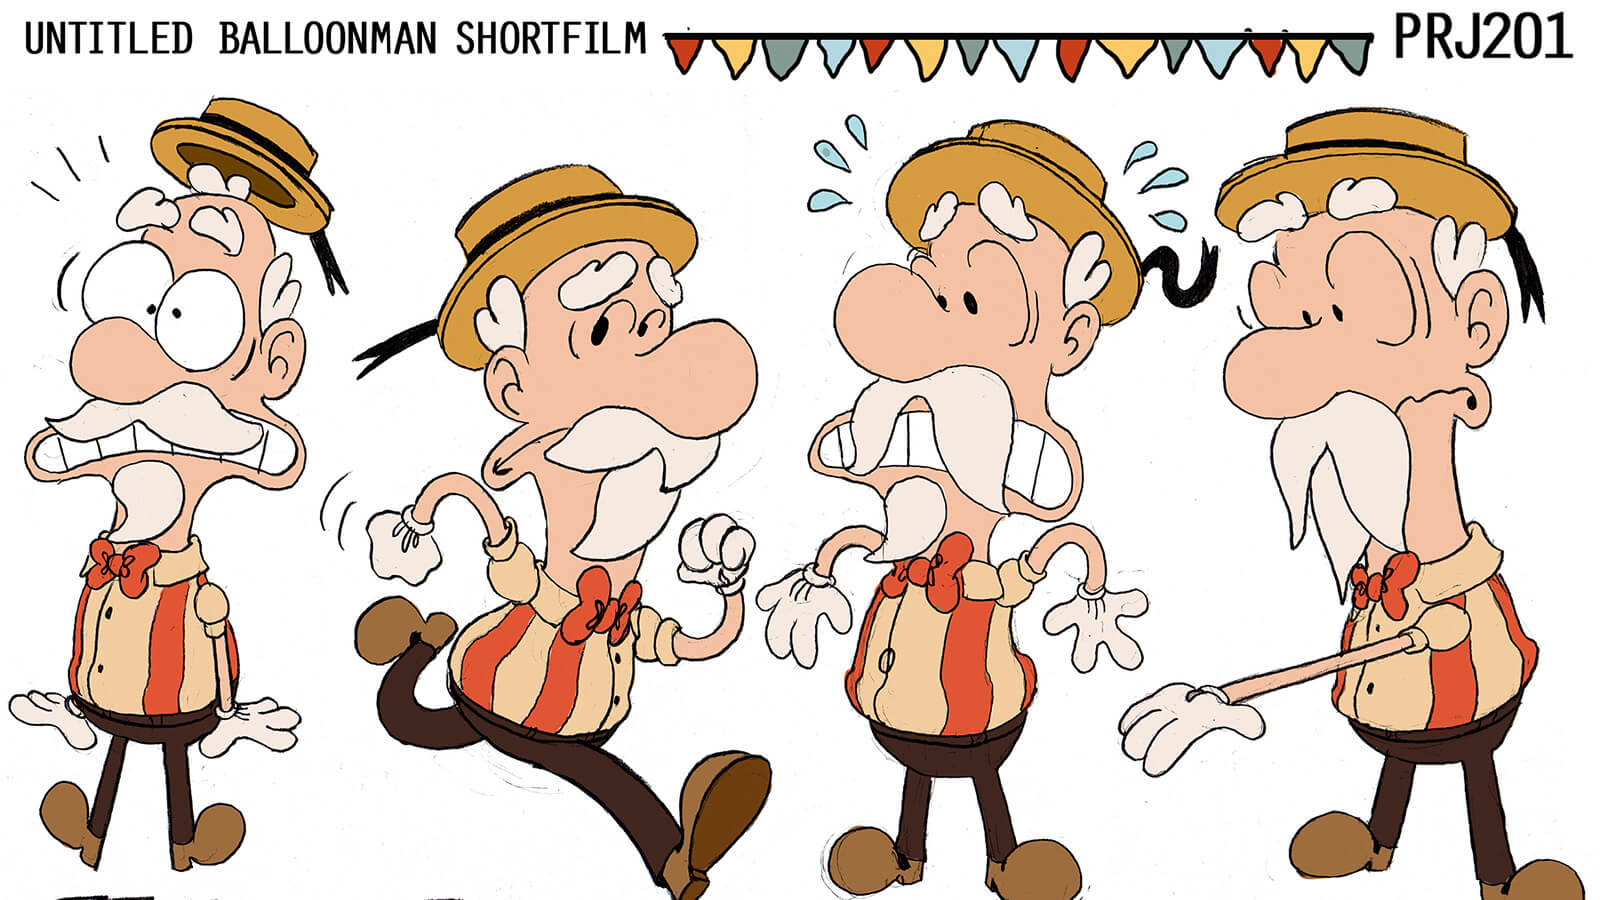 Concept artwork of the old carnival balloonman with different facial expressions